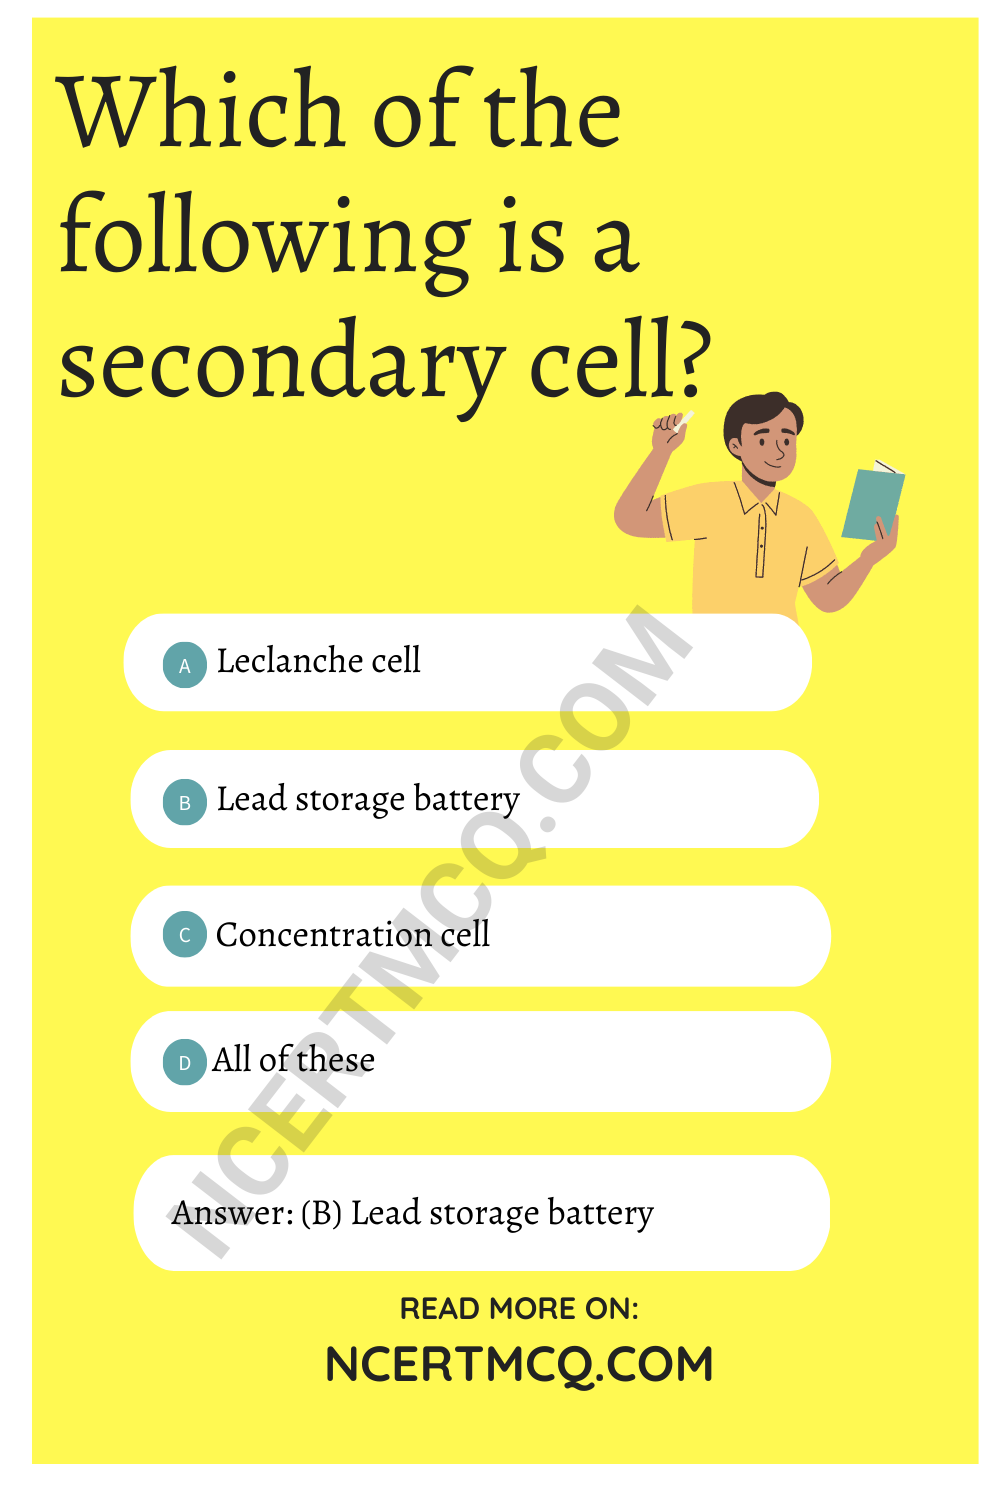 Which of the following is a secondary cell?